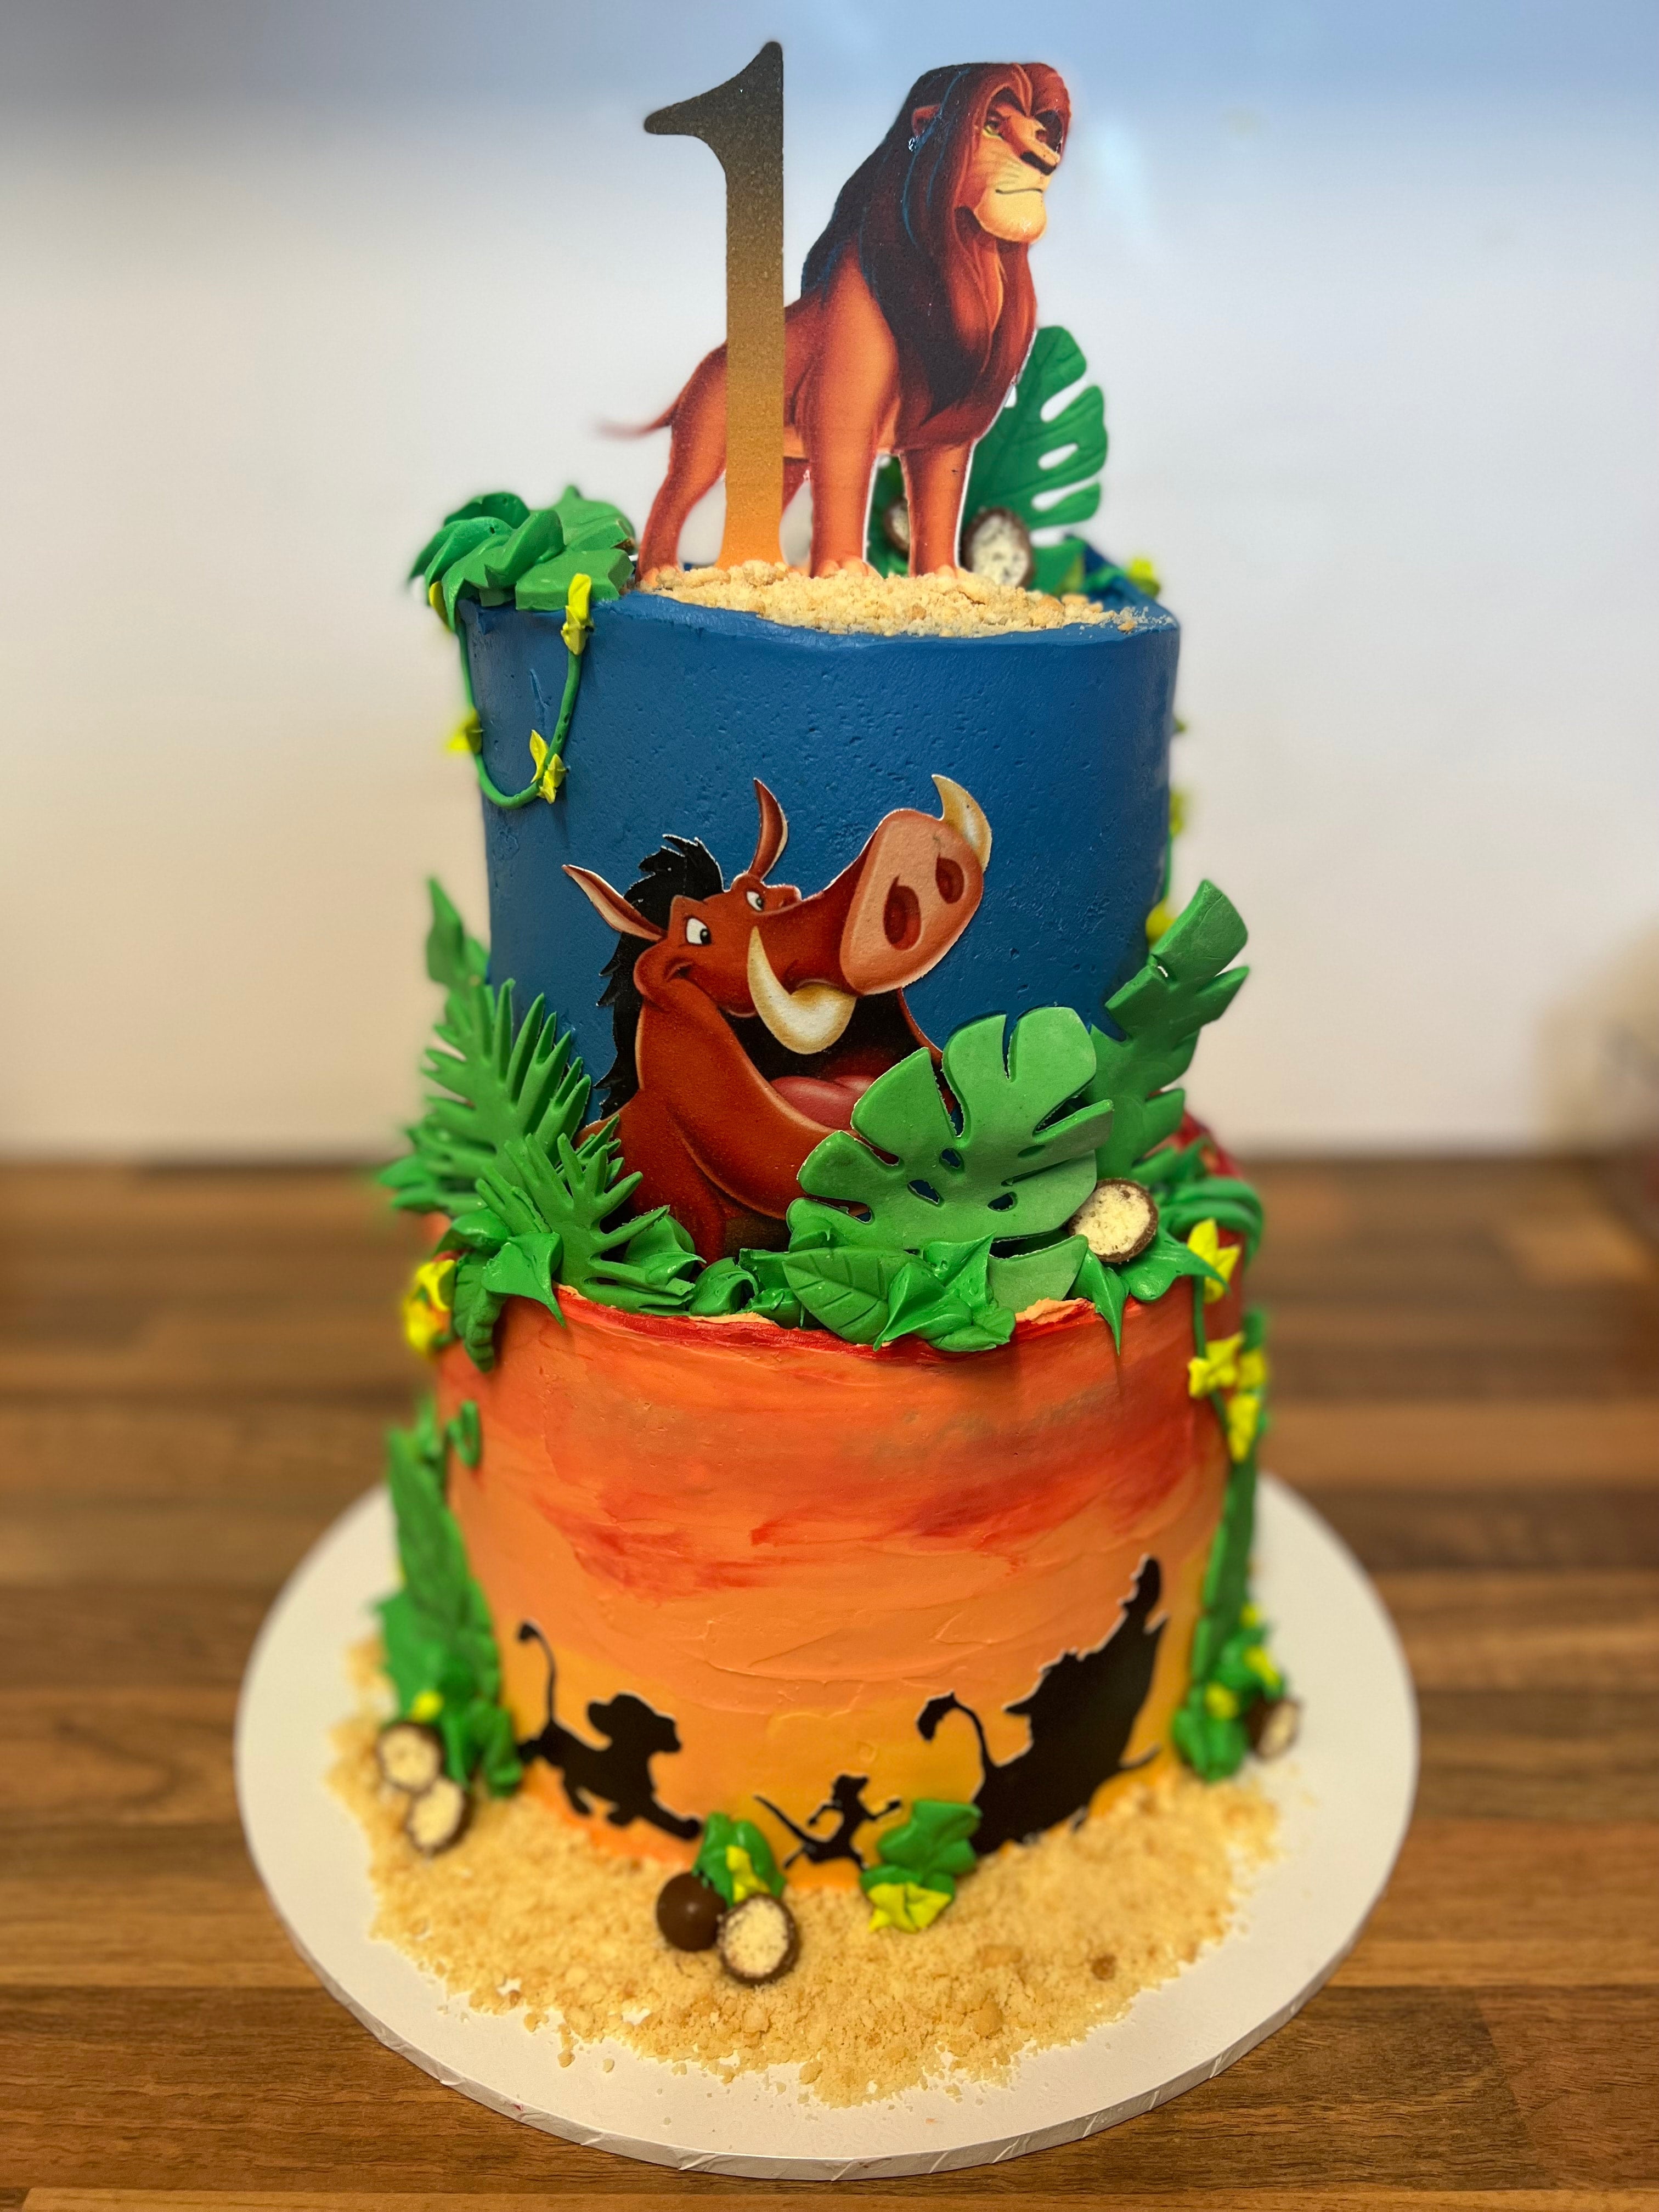 How To Make A Cupcake Cake Inspired By The Lion King | Disney Singapore